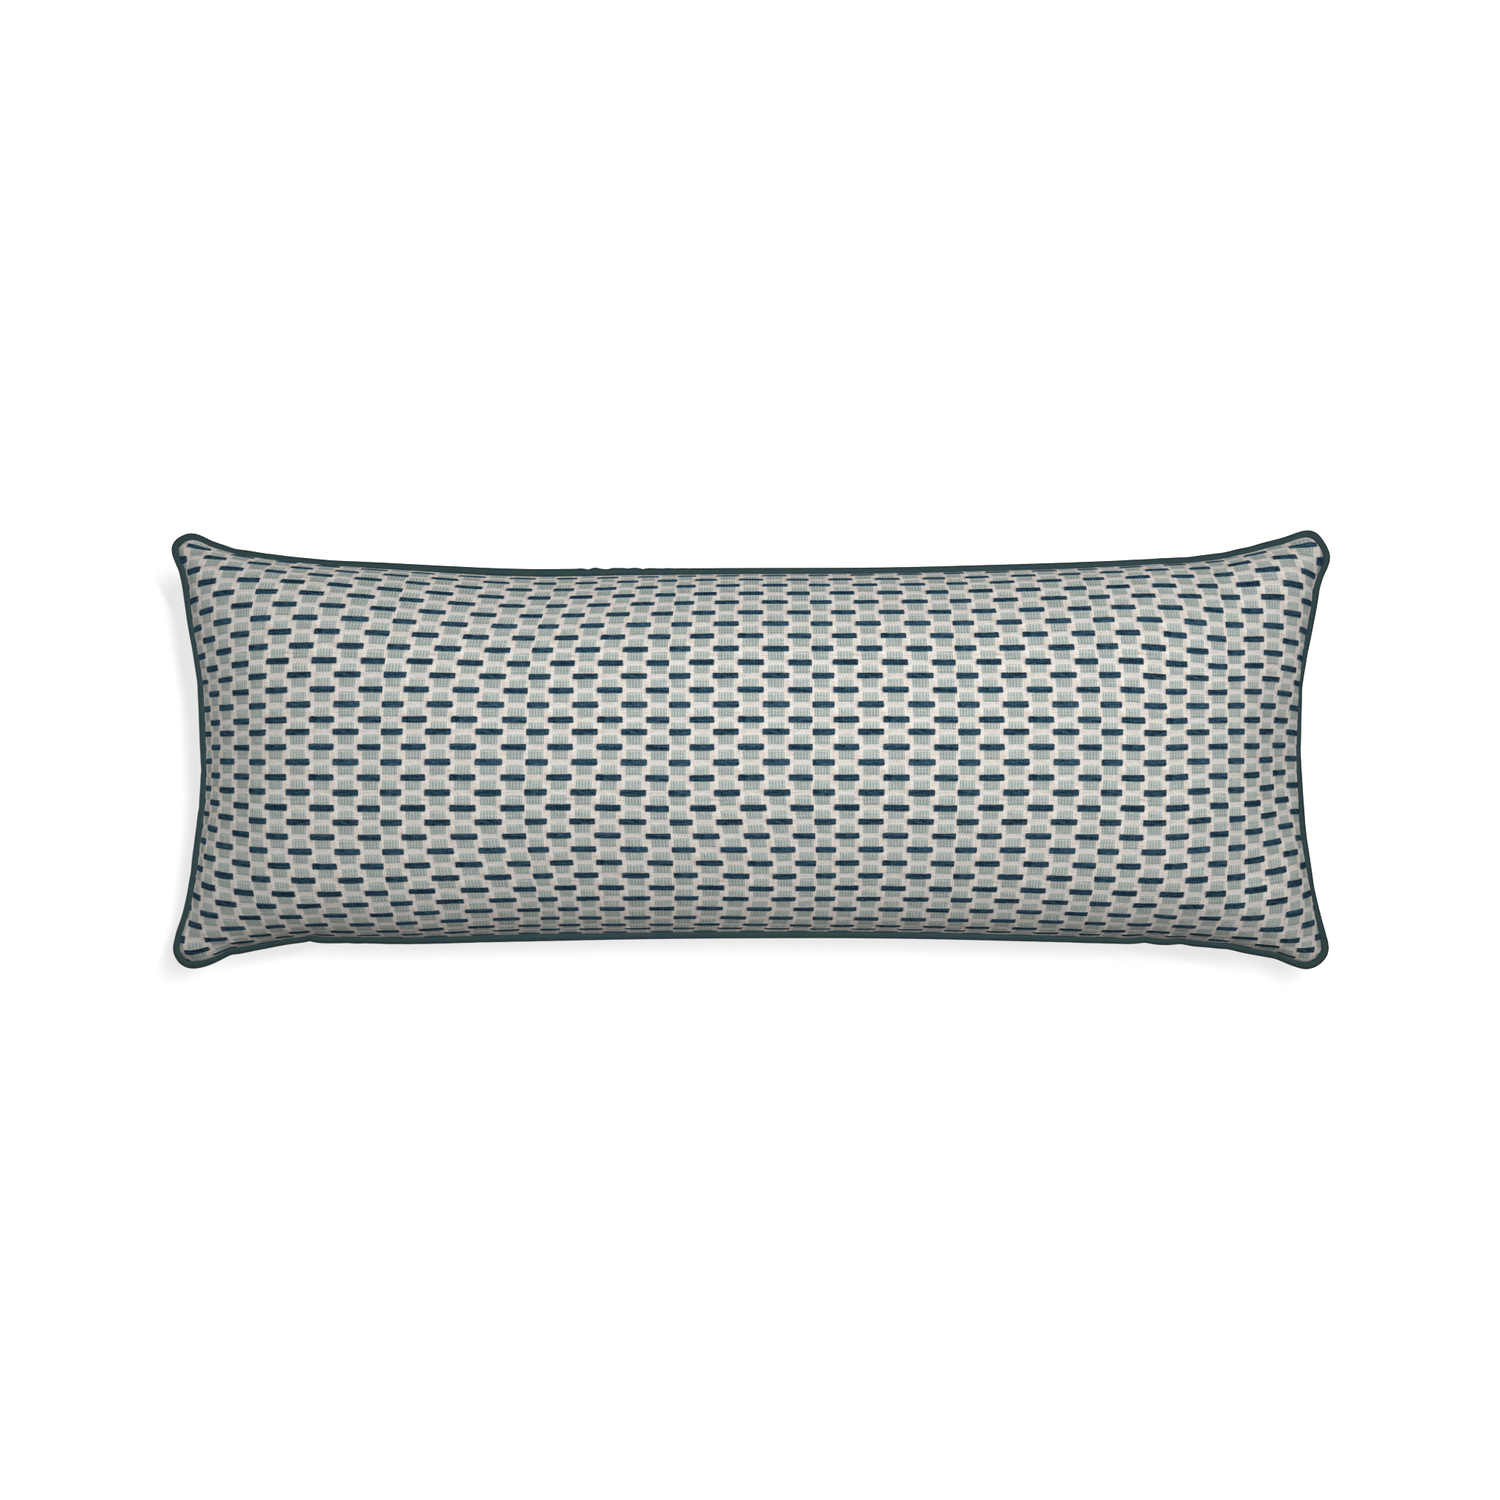 Xl-lumbar willow amalfi custom blue geometric chenillepillow with p piping on white background